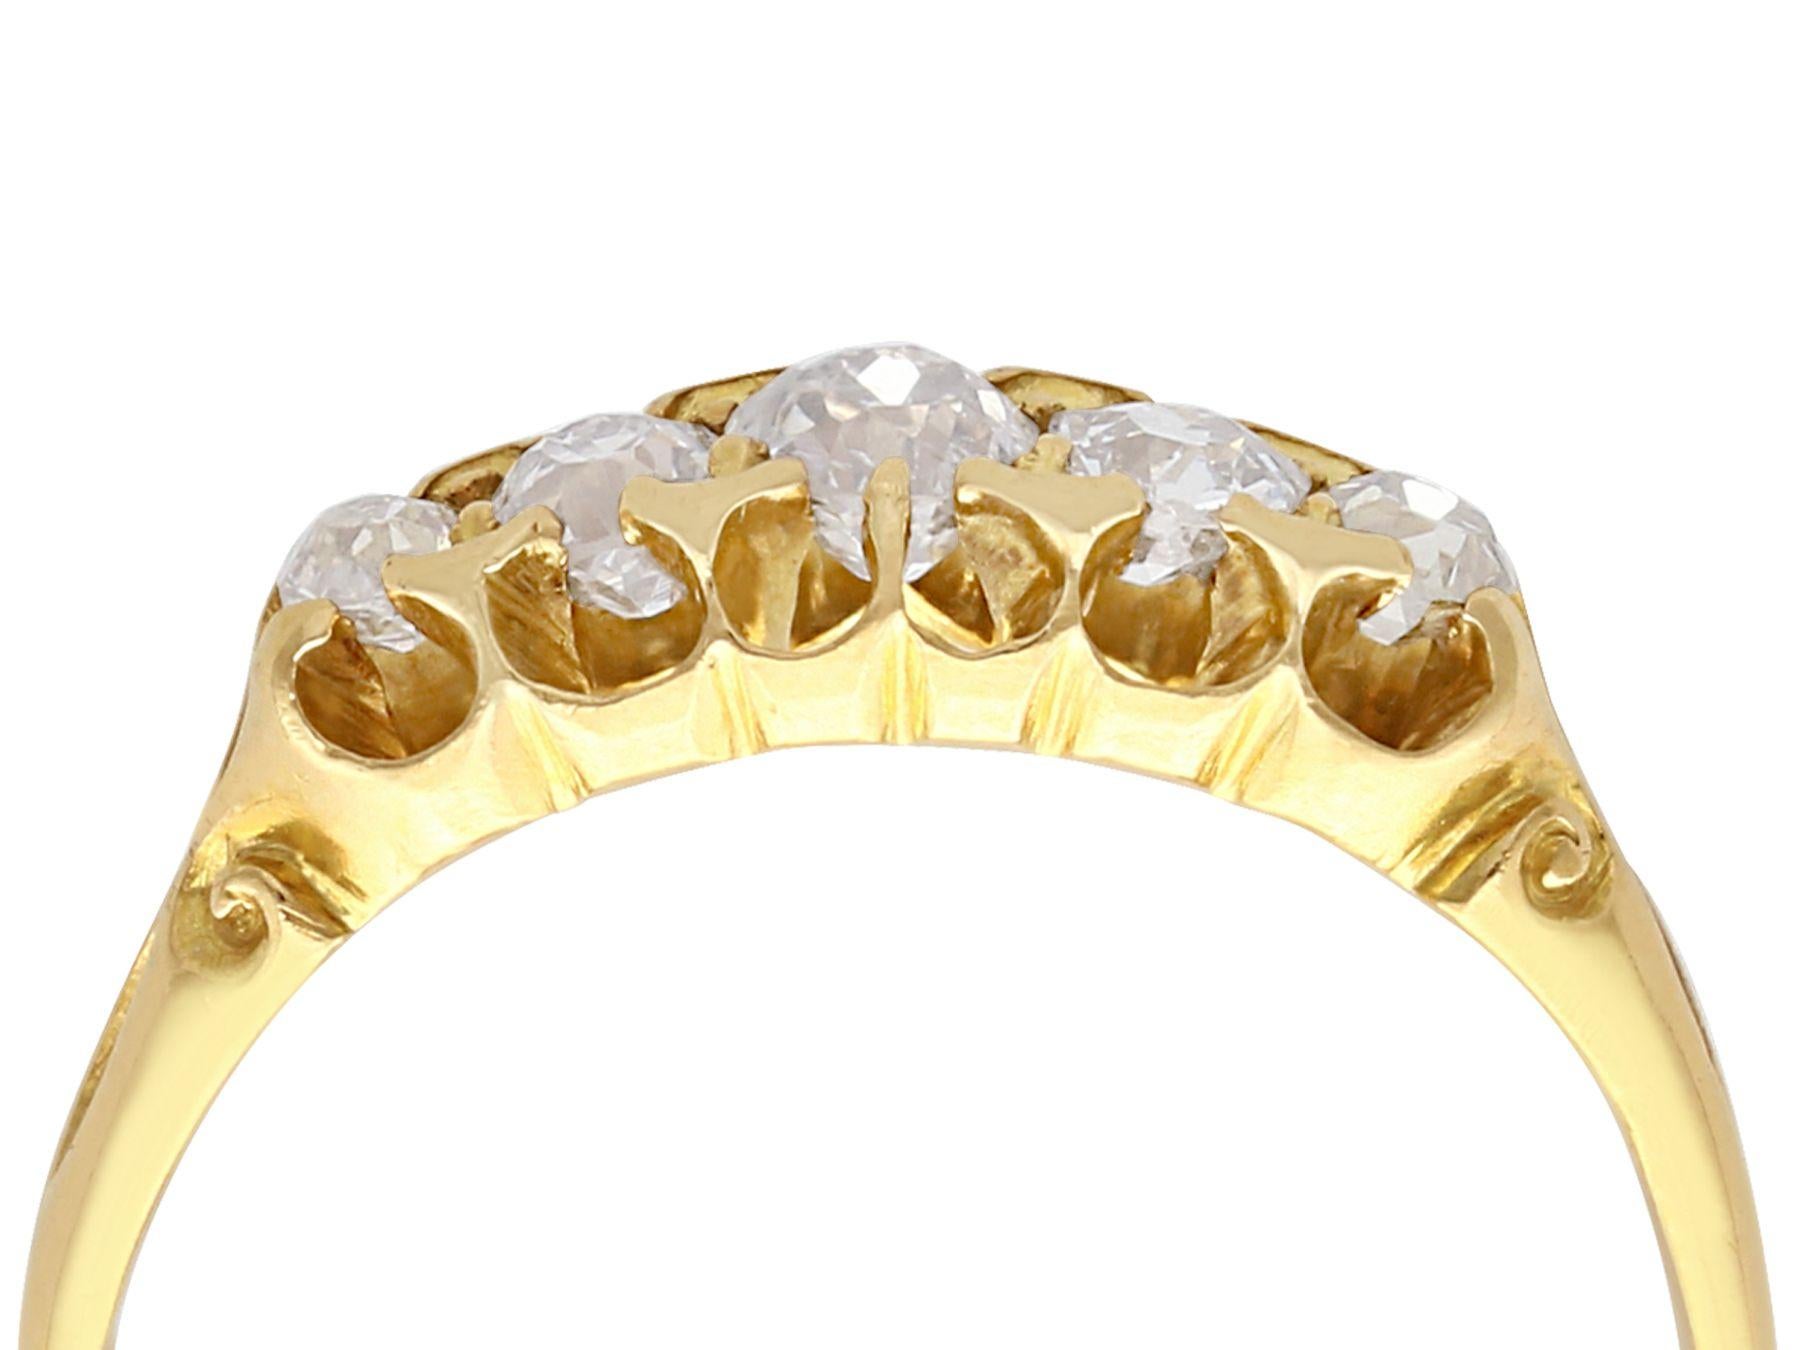 A fine and impressive antique Victorian 0.66 carat diamond and 18 karat yellow gold, five stone ring; part of our antique jewelry and estate jewelry collections

This fine and impressive antique five stone diamond ring has been crafted in 18k yellow